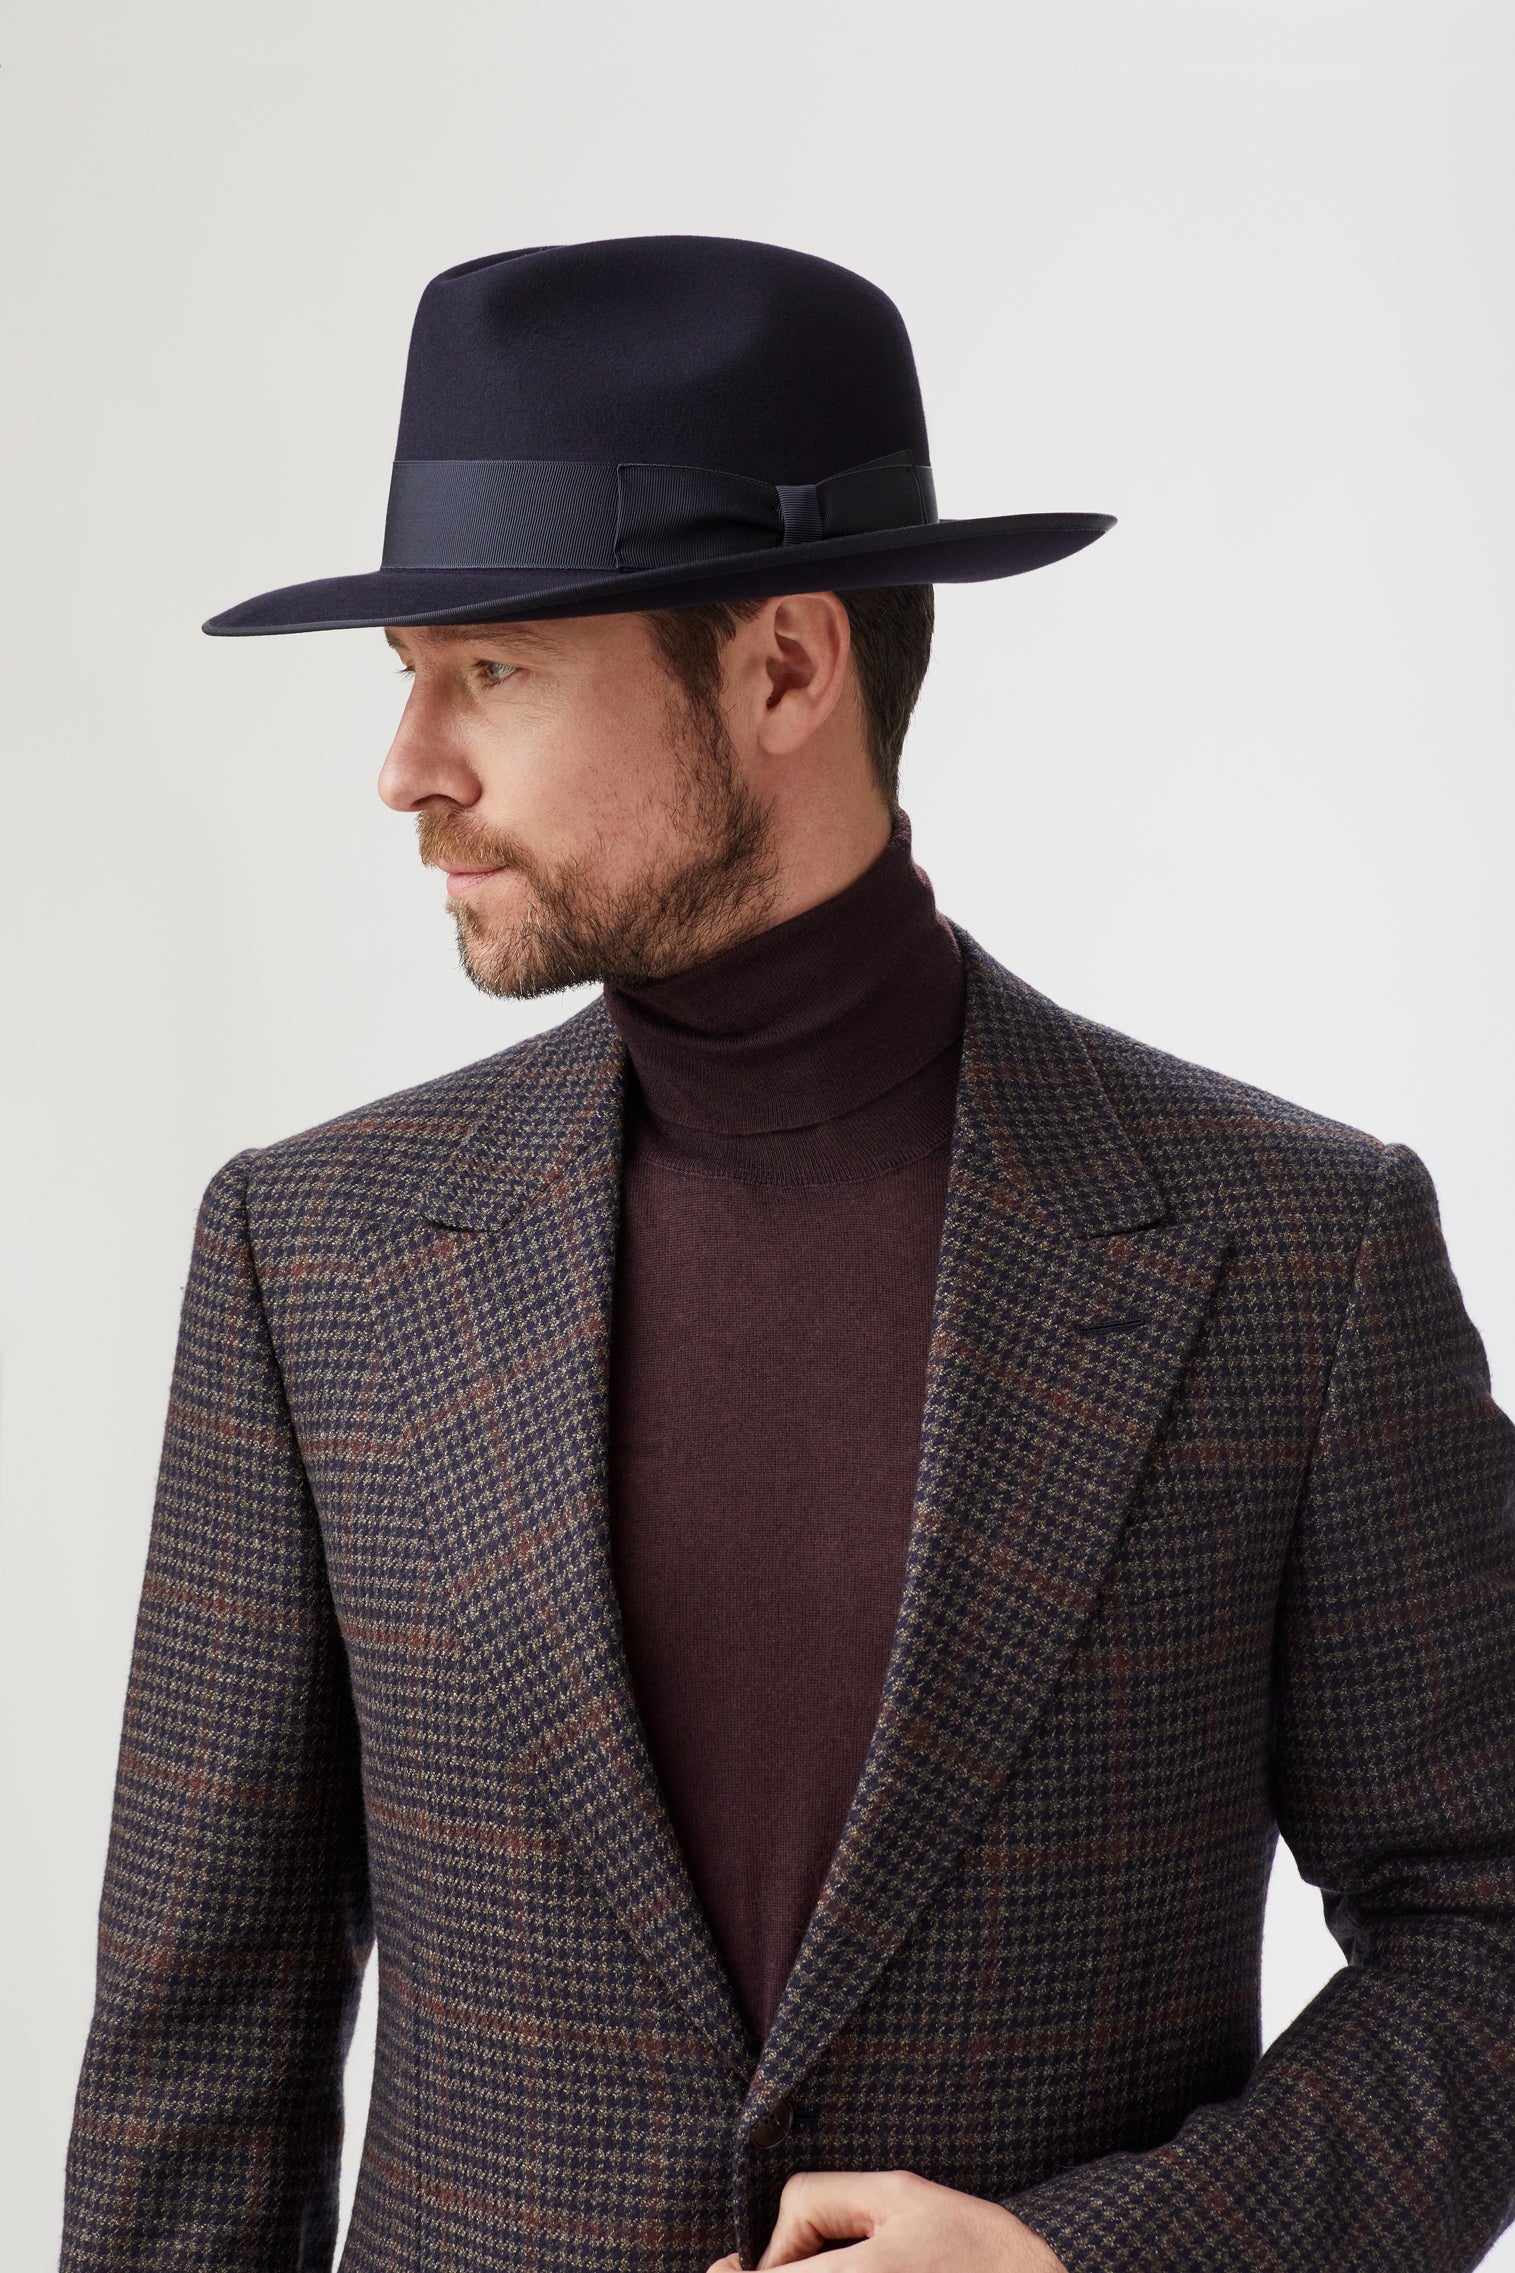 St James's Fedora - Valentines Day Gift Ideas - Lock & Co. Hatters London UK